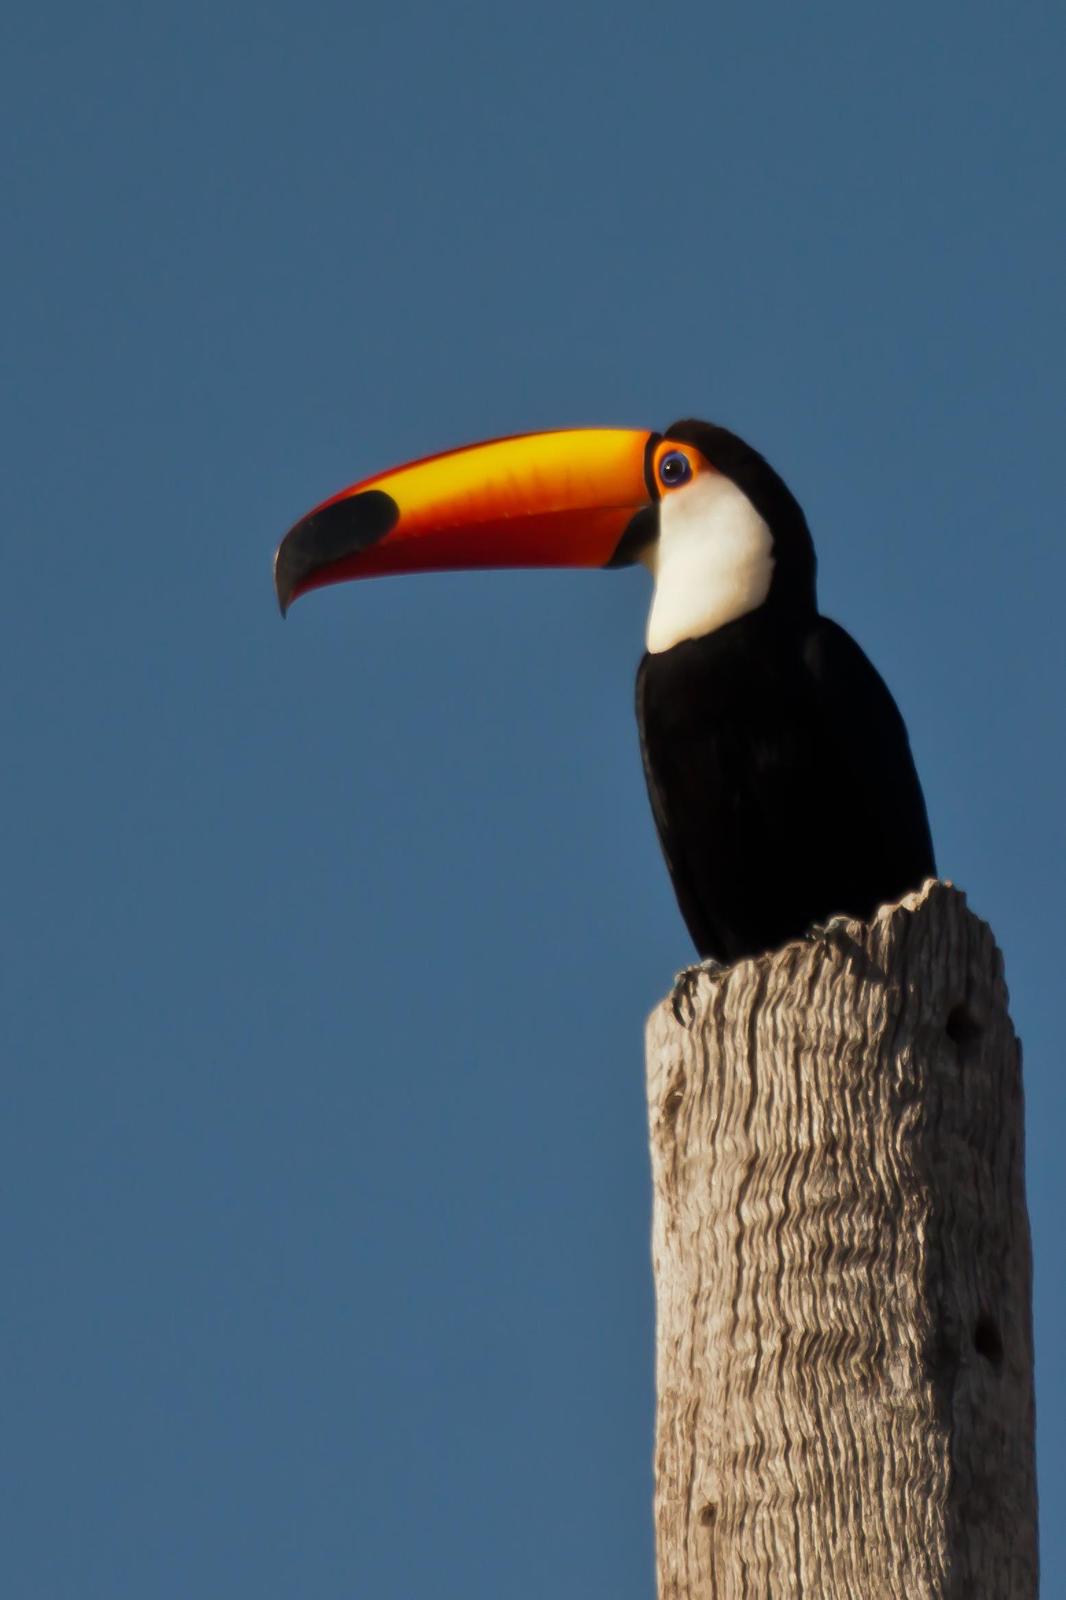 Toco Toucan Photo by Darren Bellerby